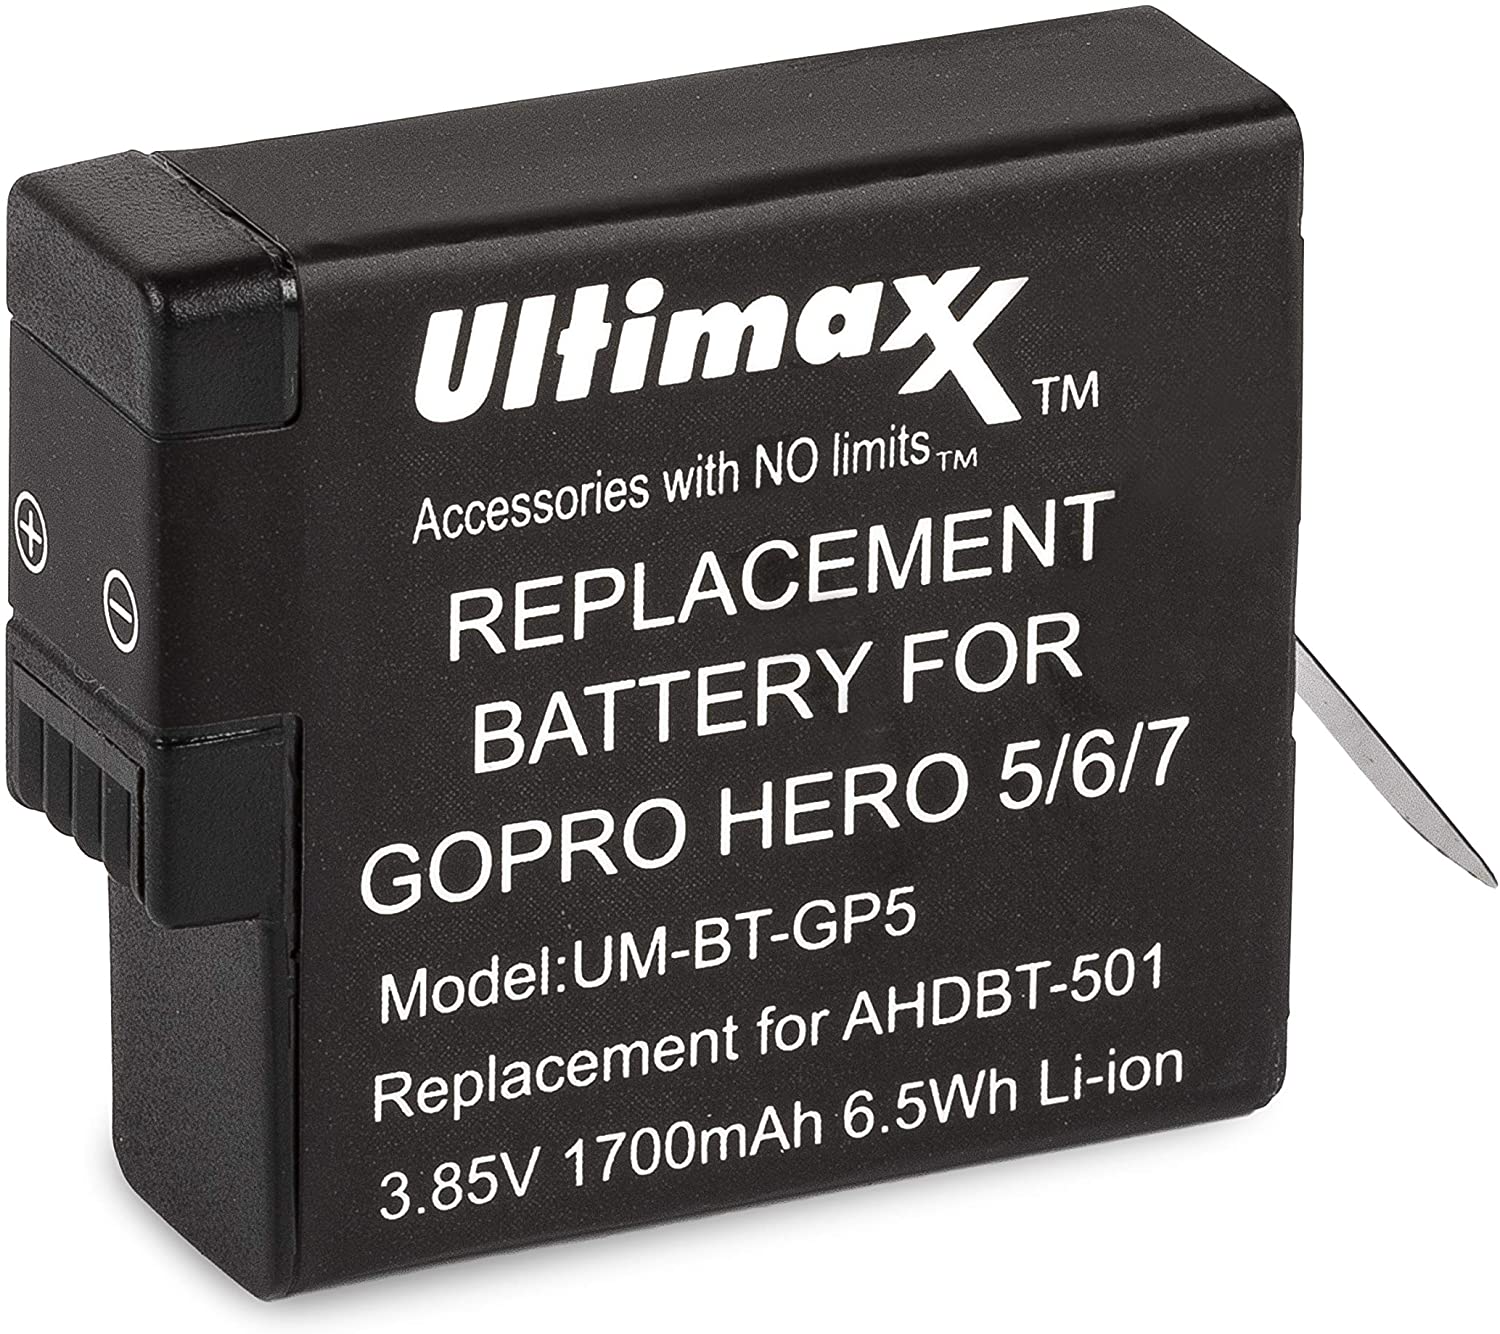 Ultimaxx Dual USB Battery Charger for GoPro Hero 5, 6, 7, 8 Batteries with 2X Extended Life Replacement Batteries (1700mAh / 3.85V / 6.5Wh) for Use with GoPro HERO5, HERO6, HERO7 & HERO8 Action Cams - image 2 of 7